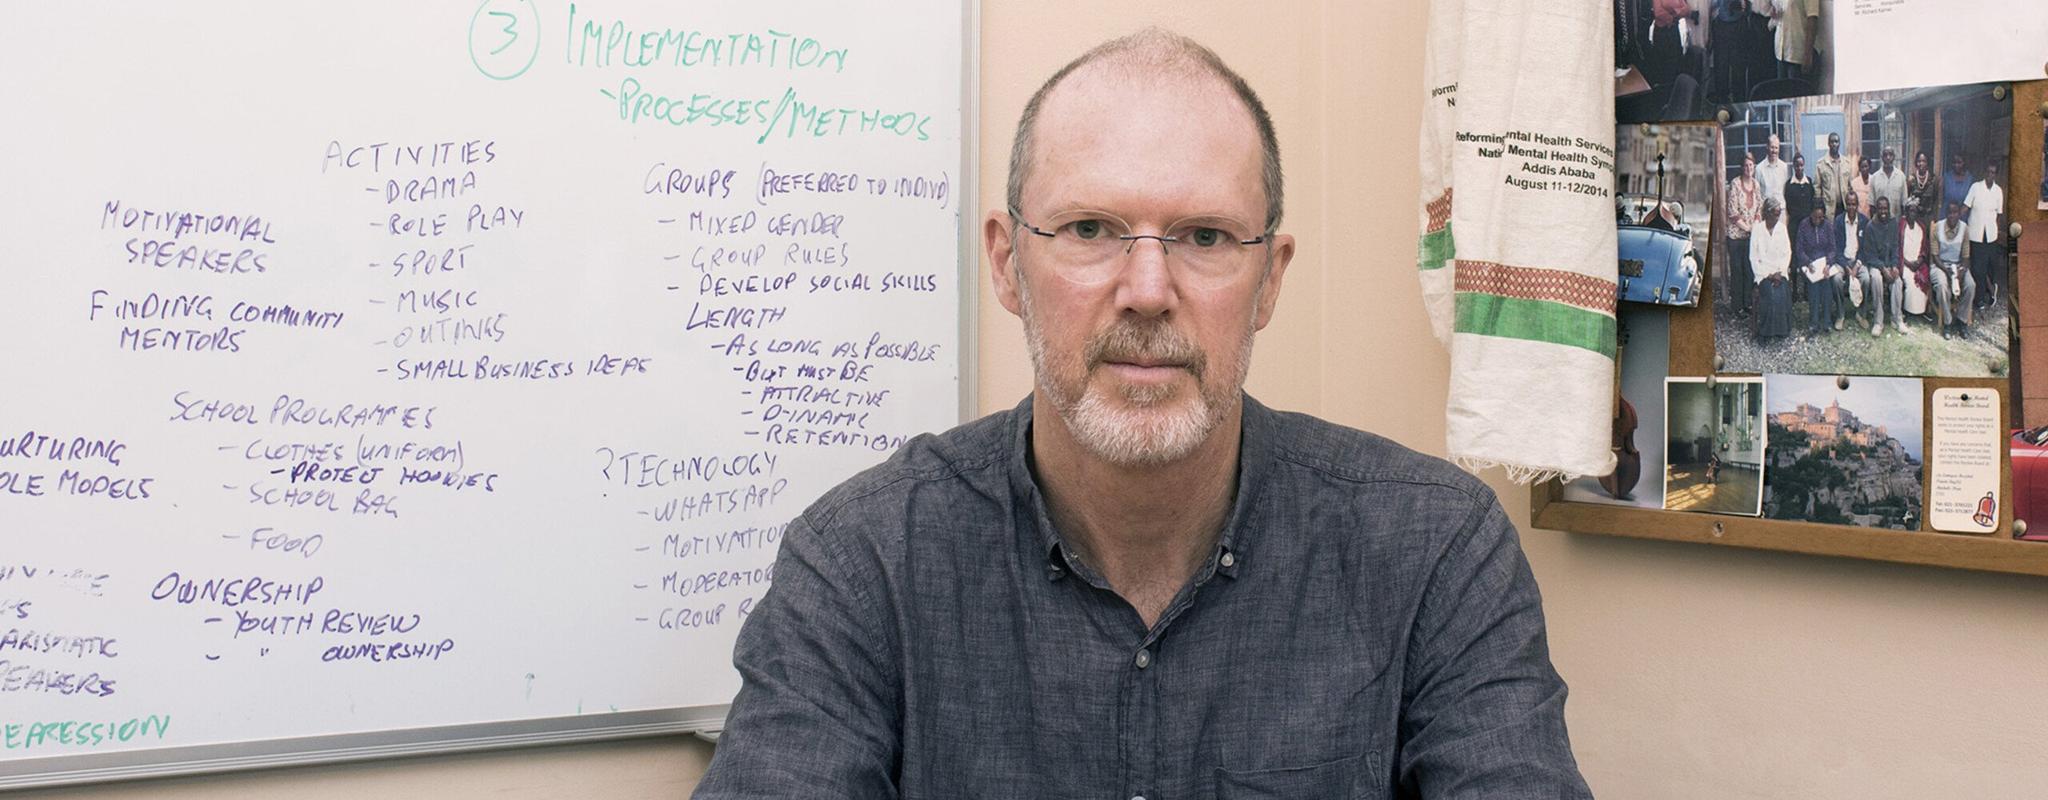 Professor Crick Lund sits at a table in the corner of an office wearing a dark linen shirt and frameless glasses. Behind him, a whiteboard is covered in scrawled notes and a pinboard displays clippings from newspapers, team photos and a memorial scarf from a conference in Addis Ababa.